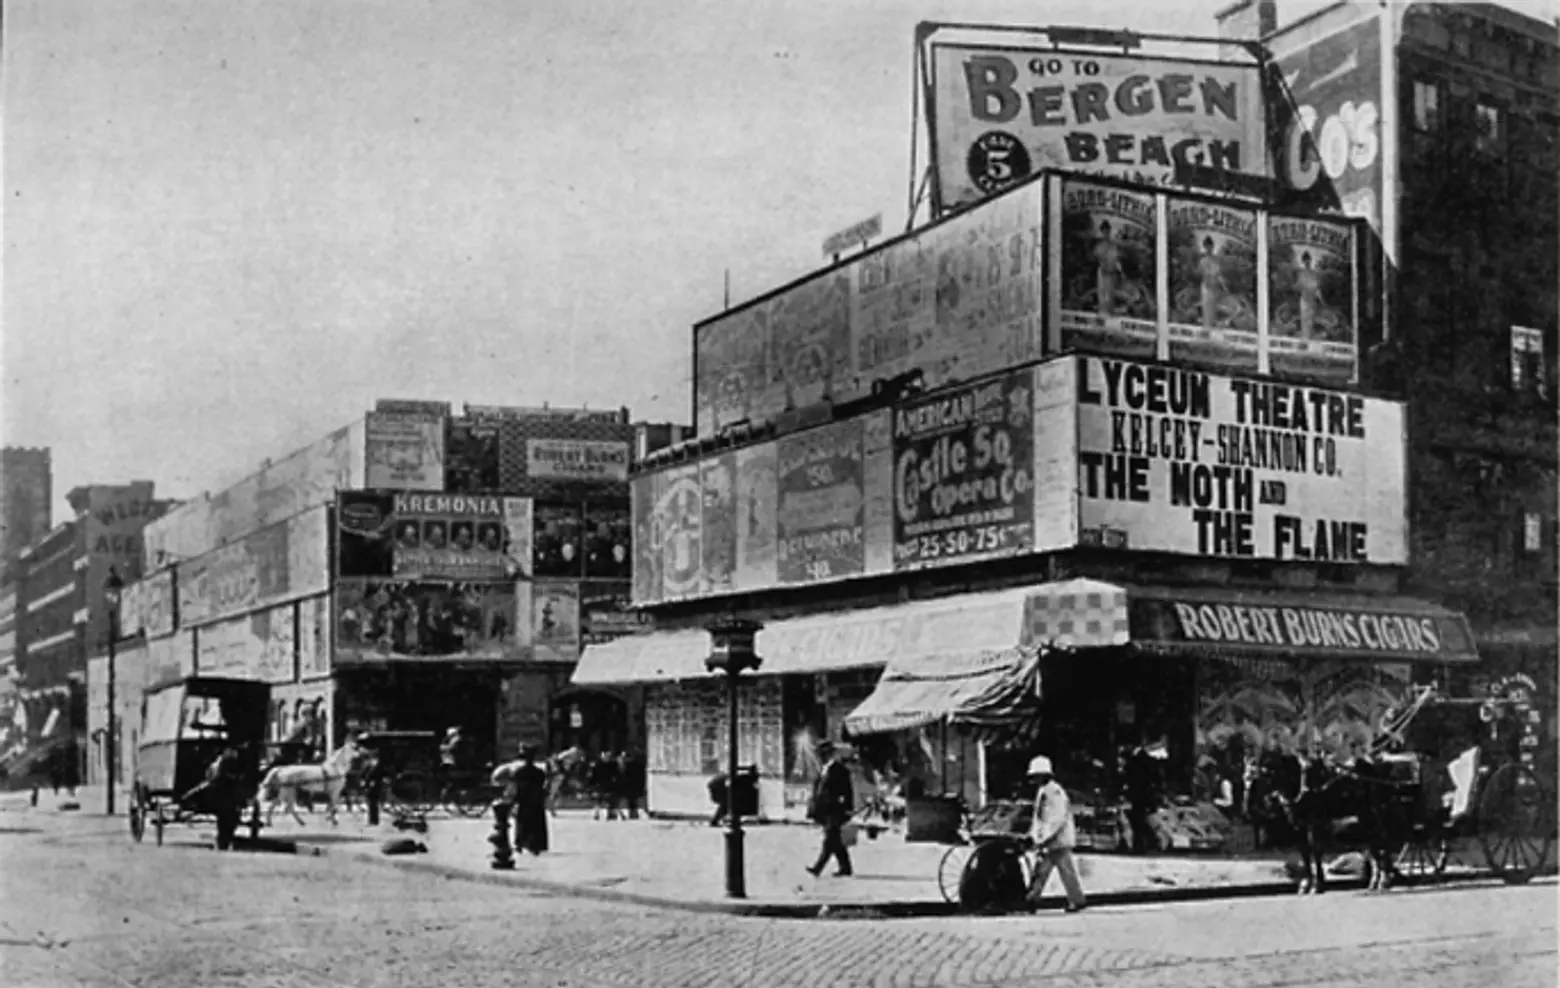 19th century times square, times square 1880s, early times square, historic photos of times square